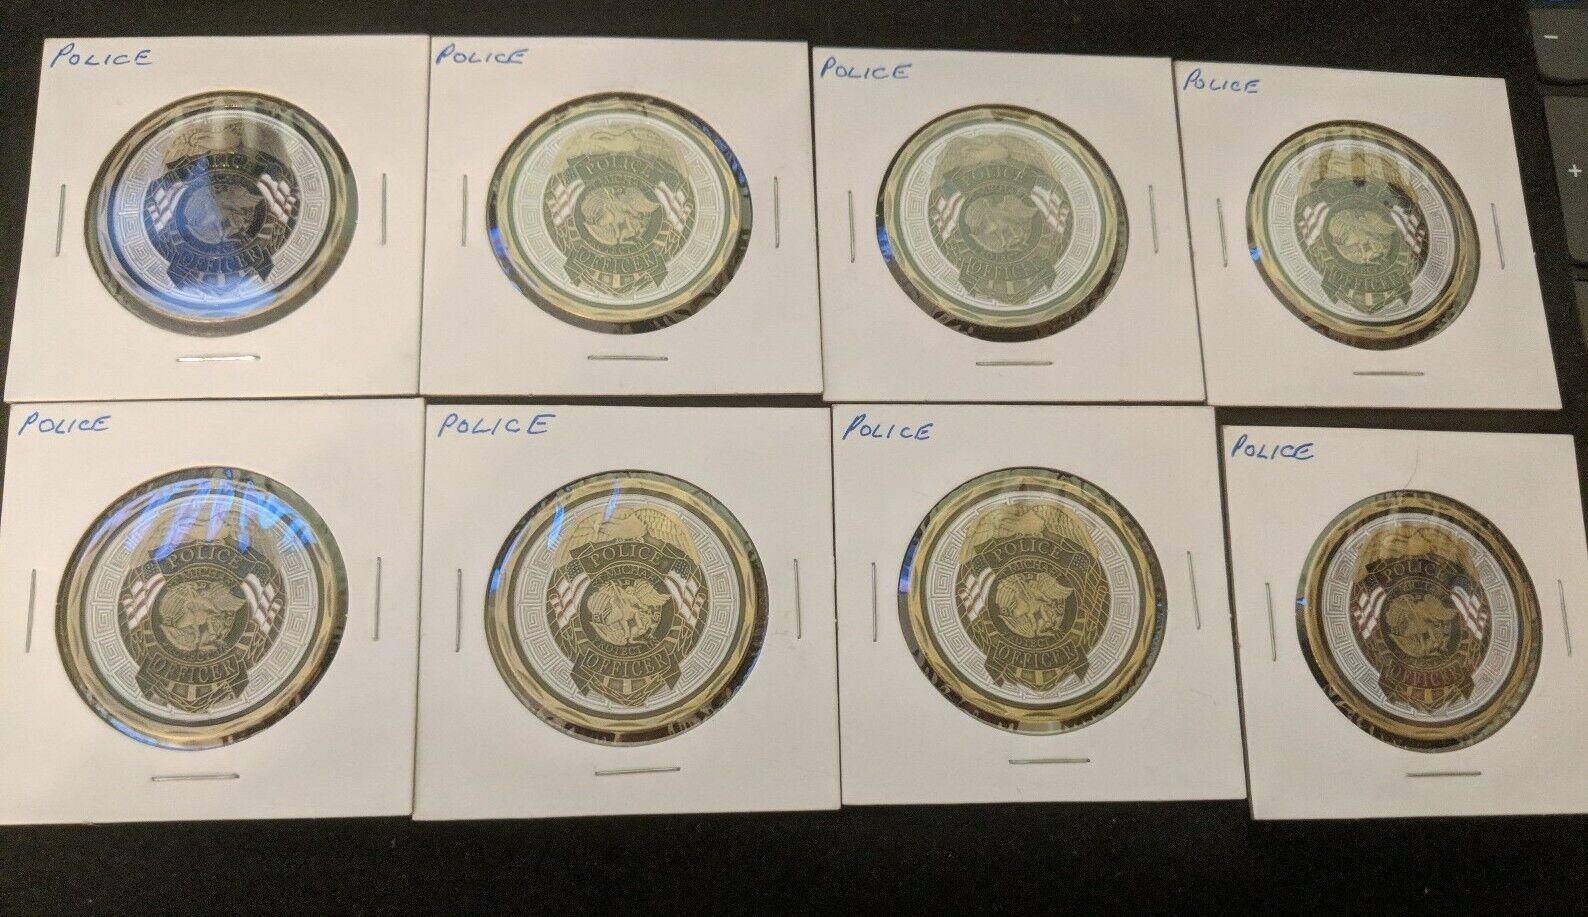 Lot of 8 same: Police Challenge "Style" Coins-St. Michael Patron Saint of Law En Без бренда